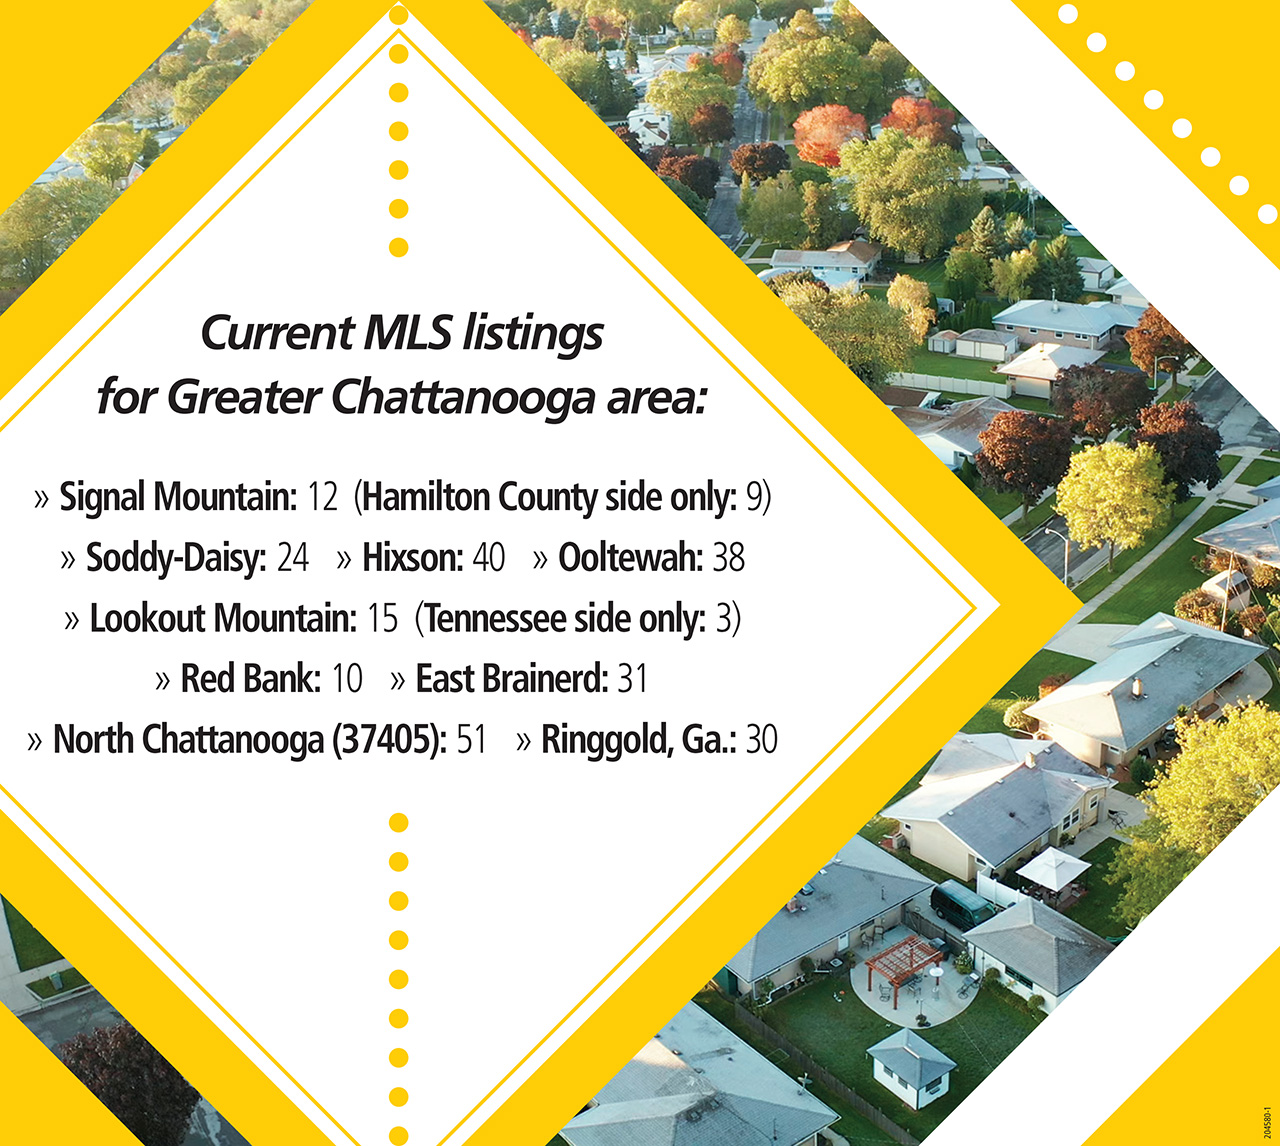 Chattanooga Homes for Sale, Signal Mountain, Soddy Daisy, Lookout Mountain, Hamilton County and More